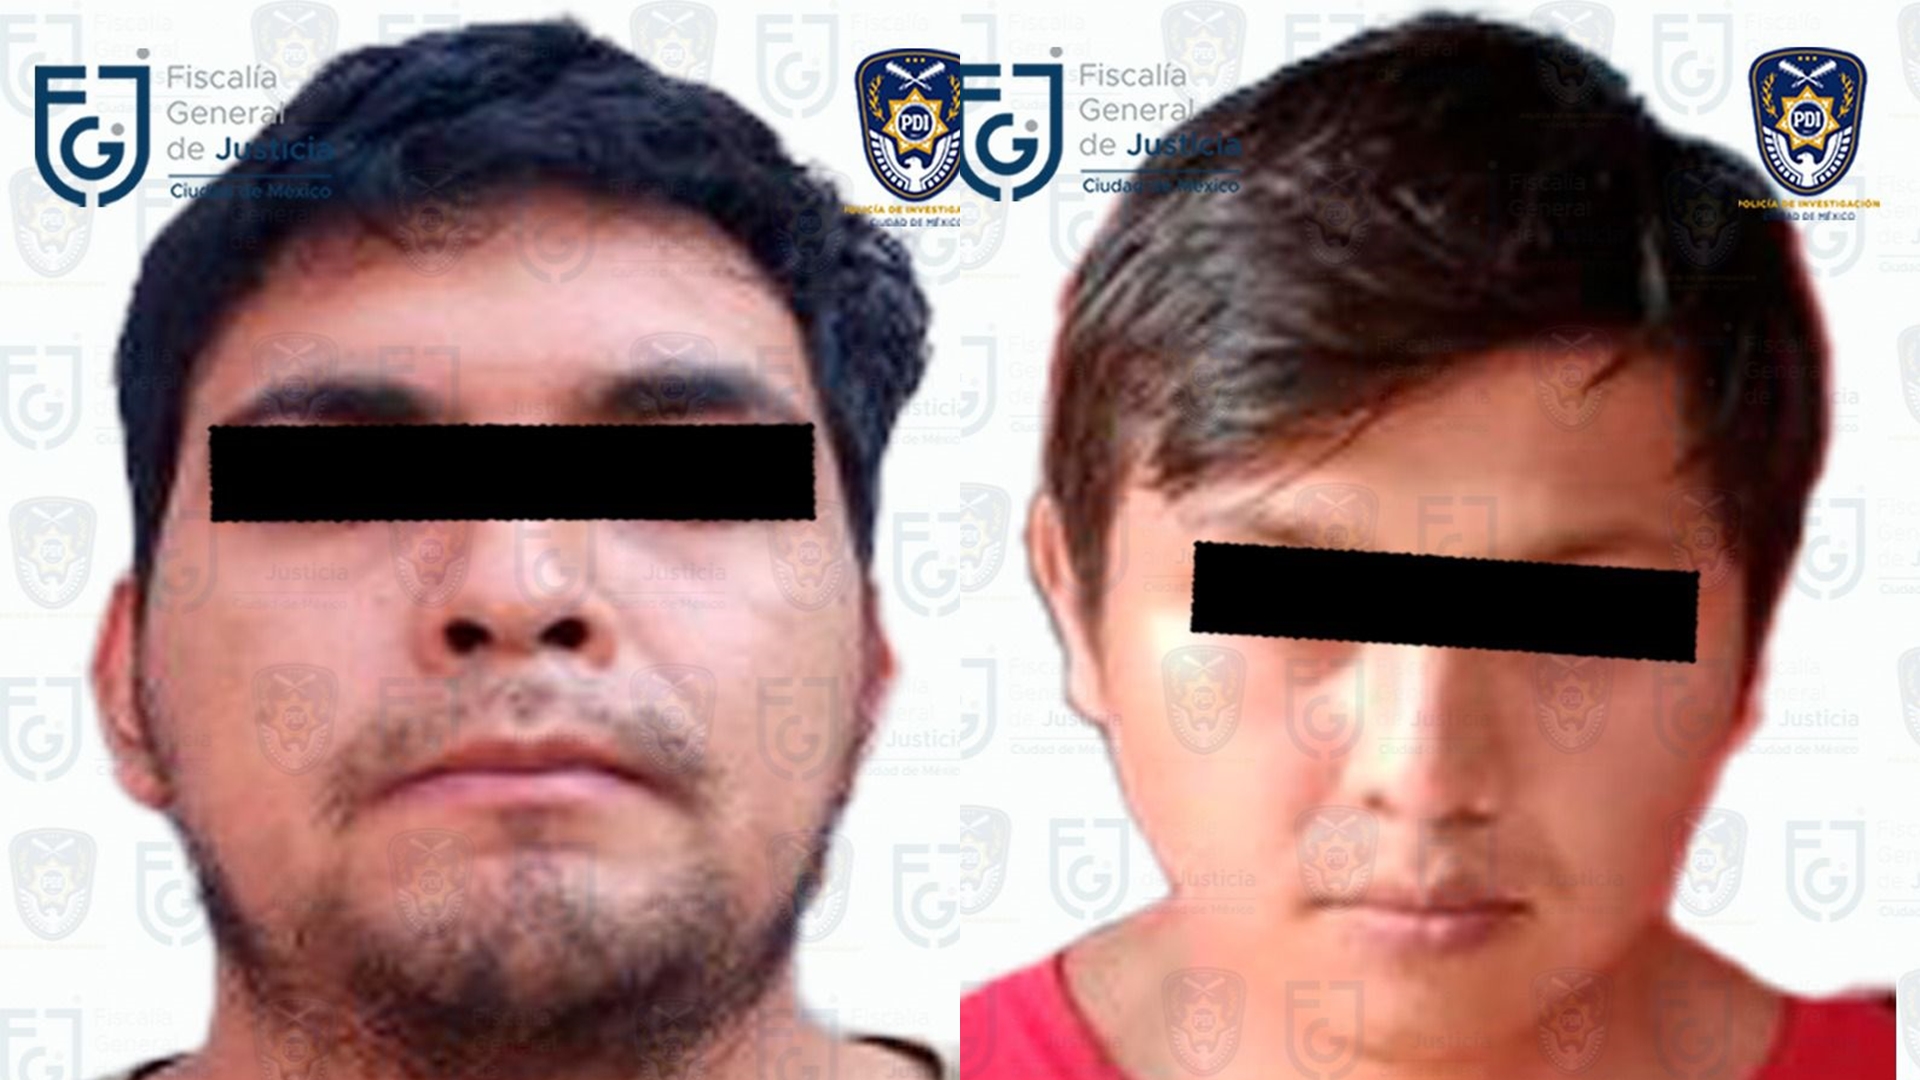 David "N" (left) and Jesús "N" (Right) were arrested at the scene.  Photo: FGJCDMX